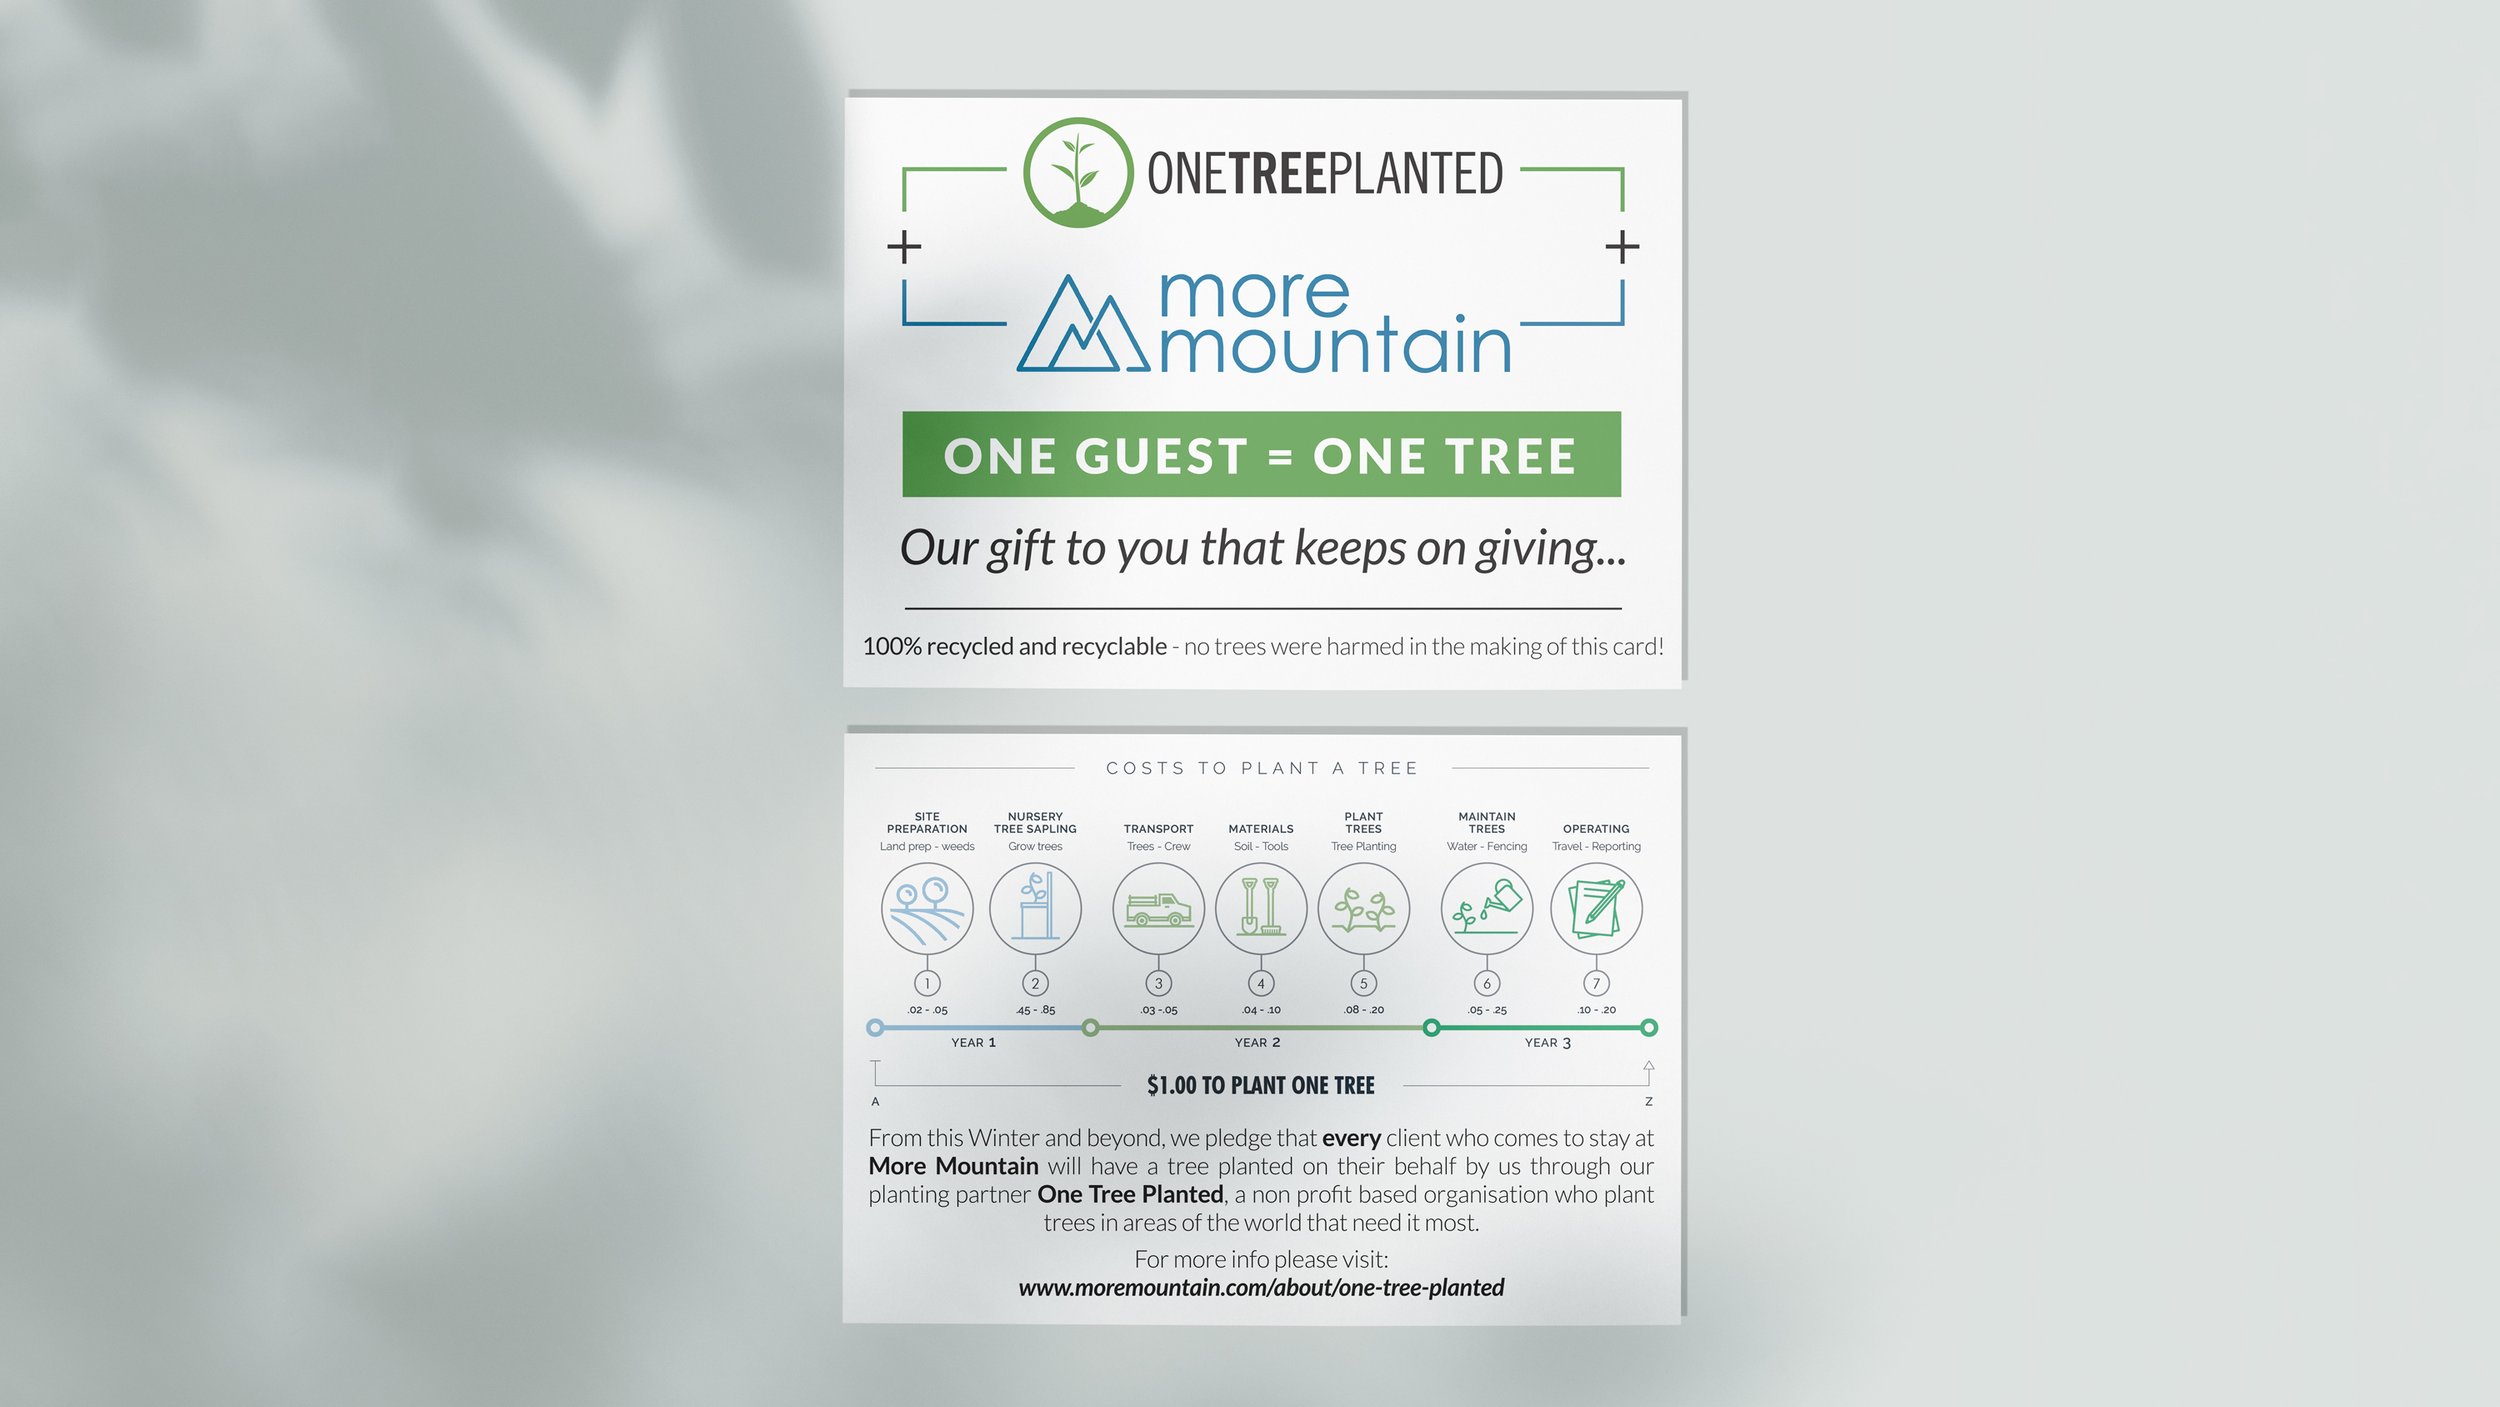 More Mountain x One Tree Planted